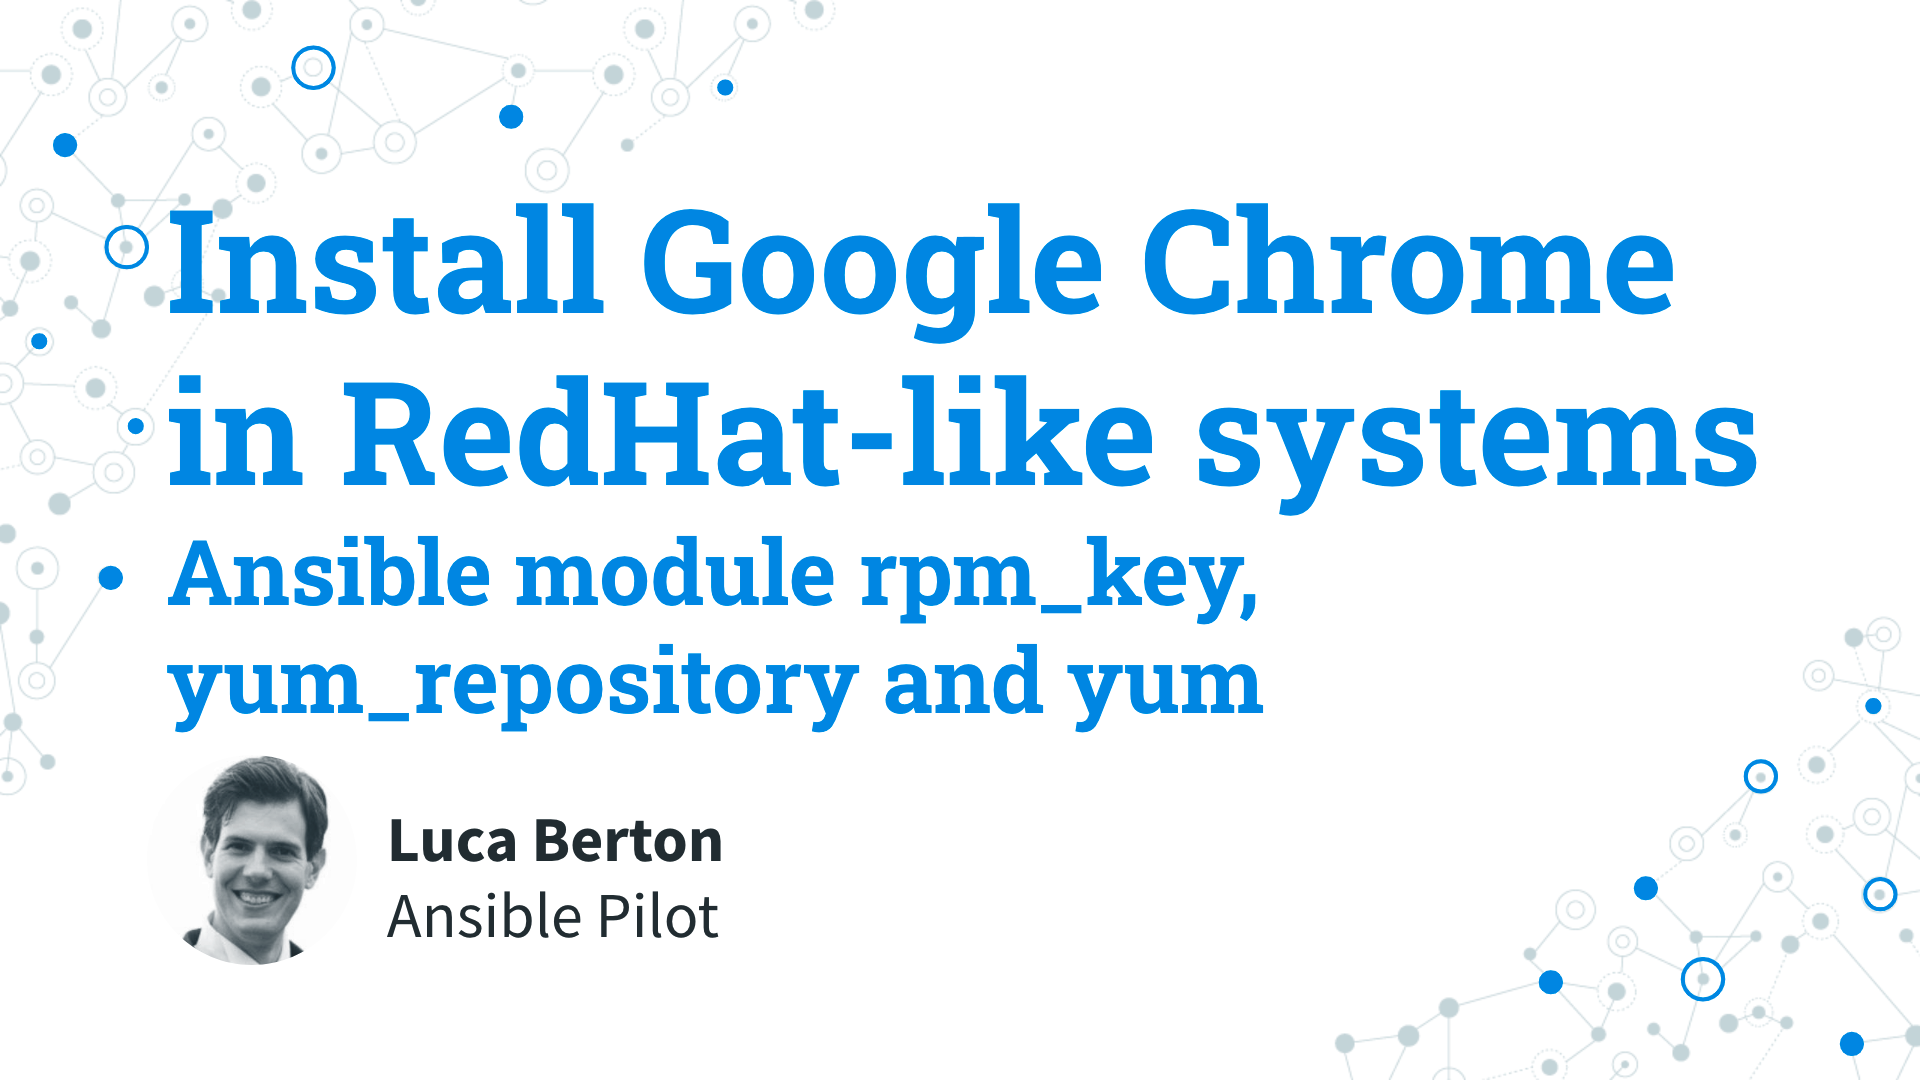 Install Google Chrome in RedHat-like systems - Ansible module rpm_key, yum_repository and yum